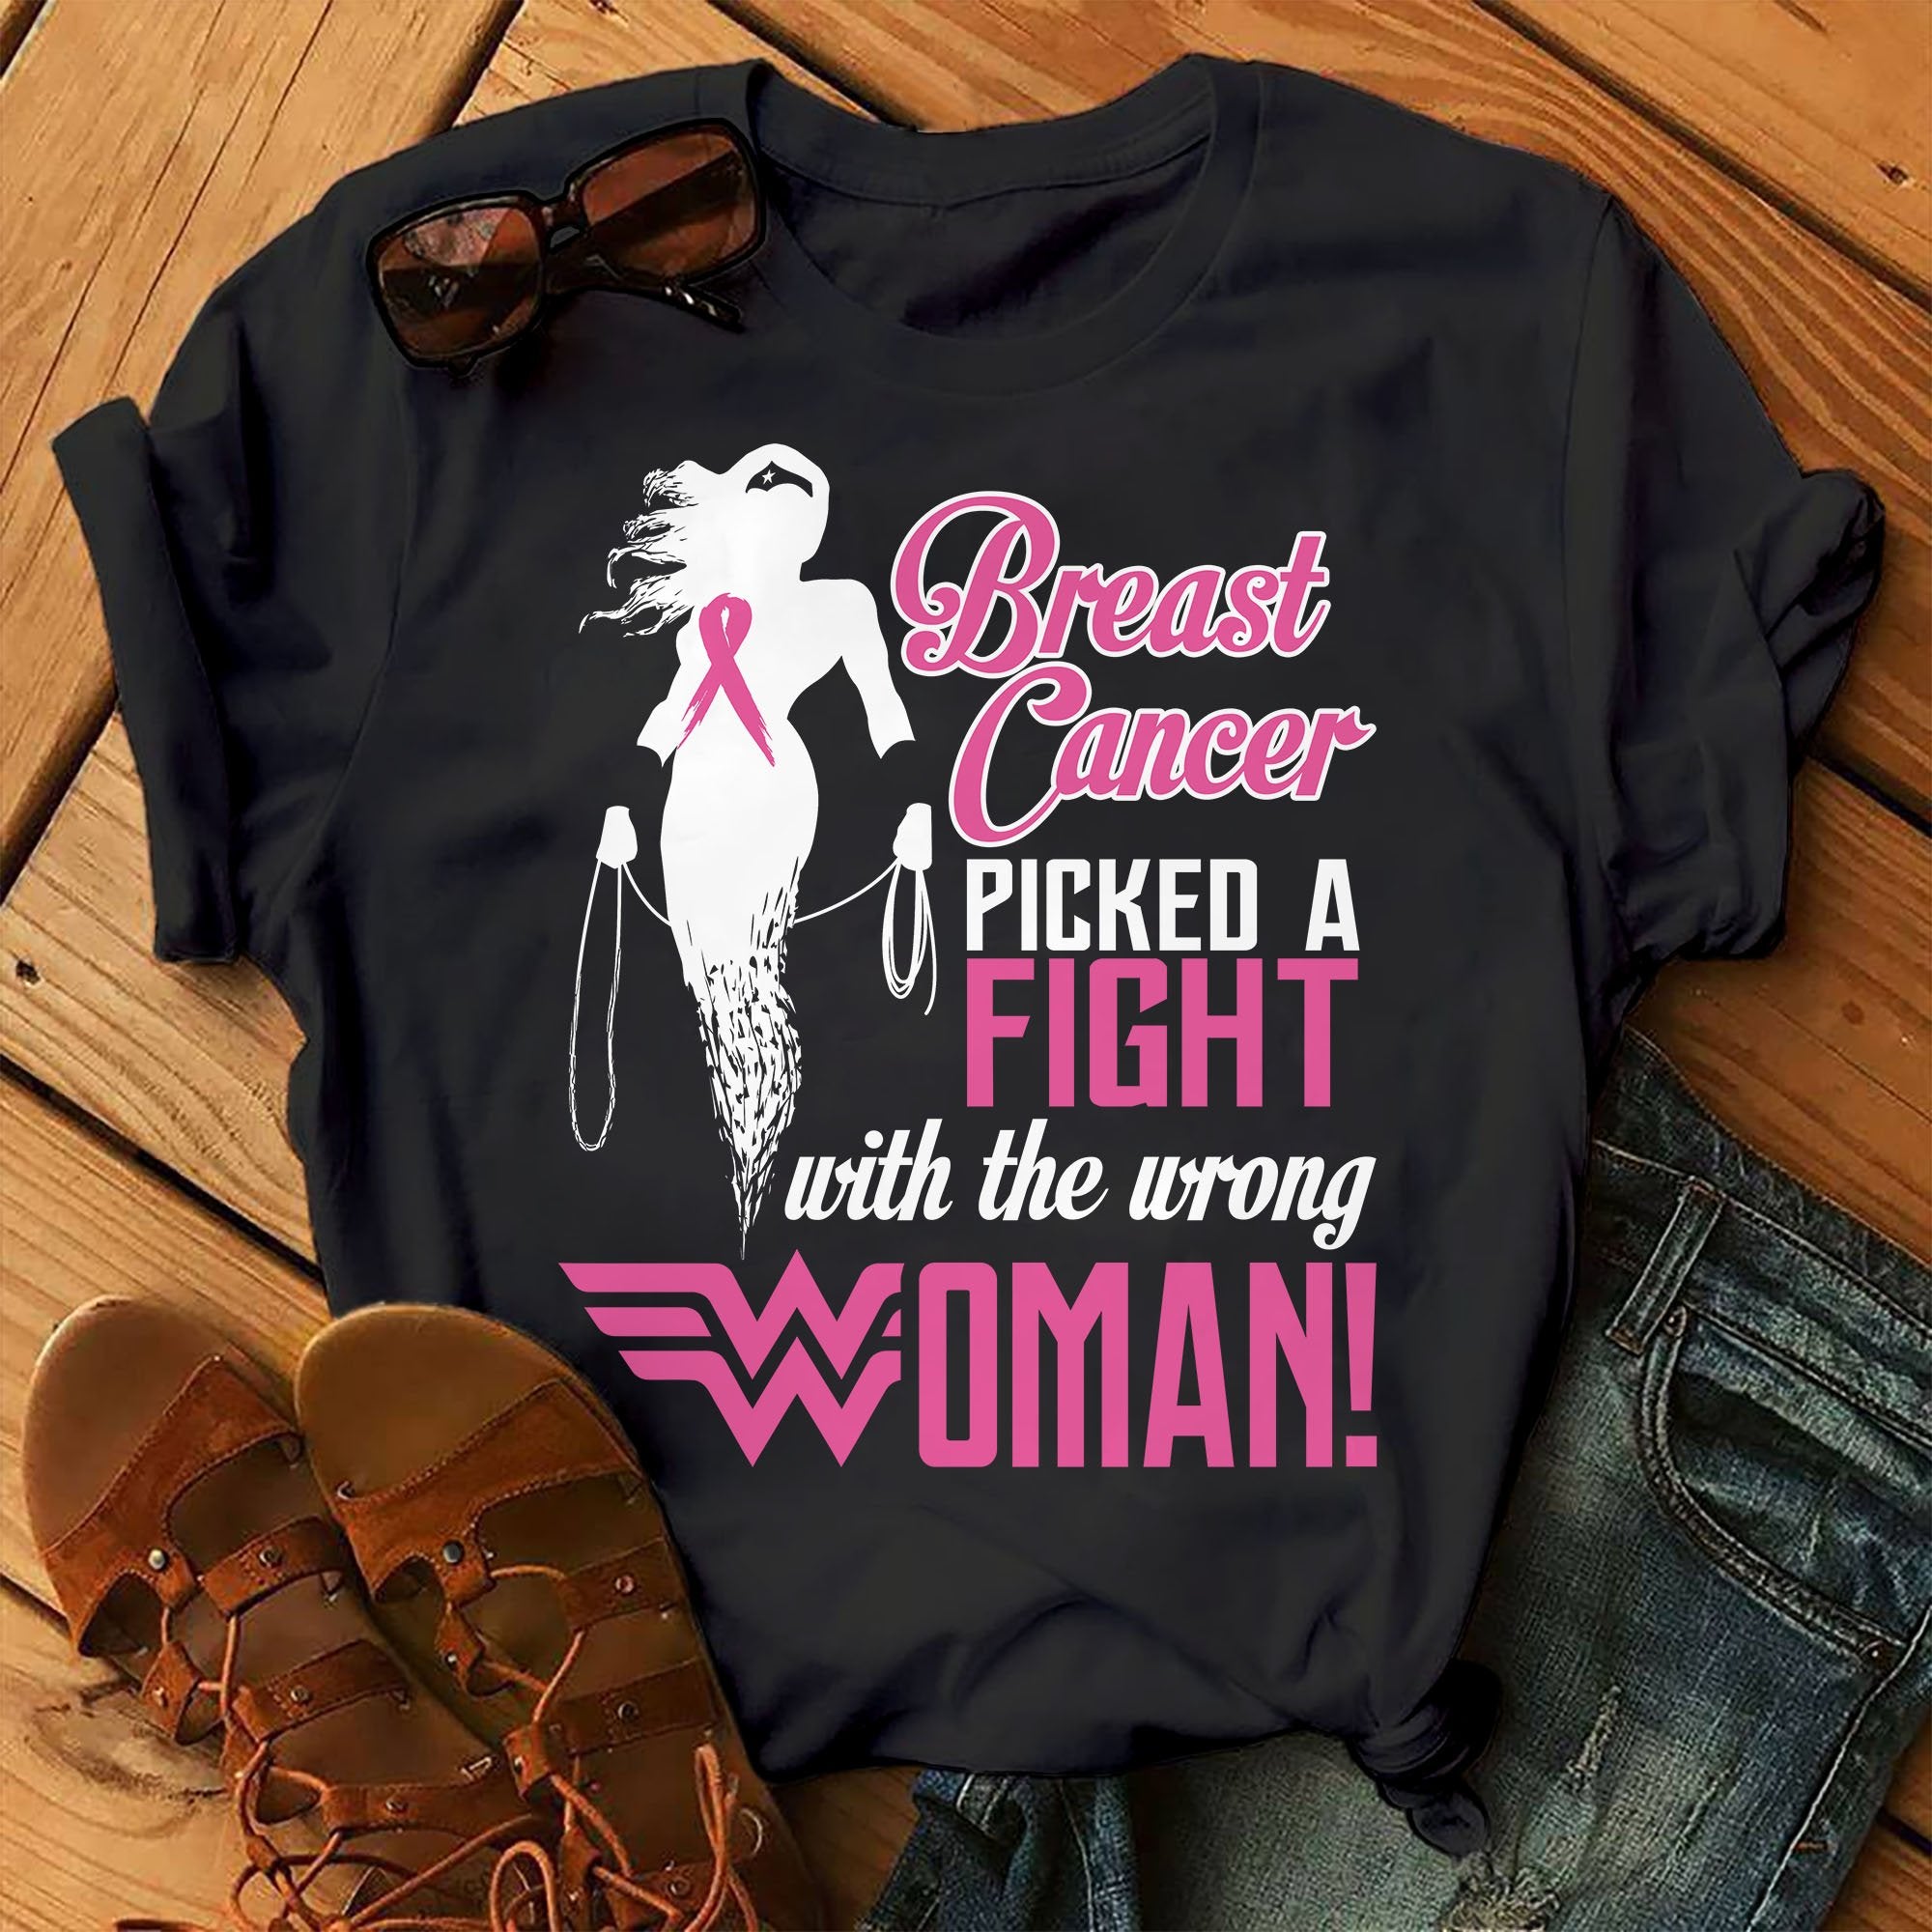 Breast Cancer Picked A Fight With The Wrong Woman Unisex T-shirt Hoodie Sweatshirt Plus Size S-5xl